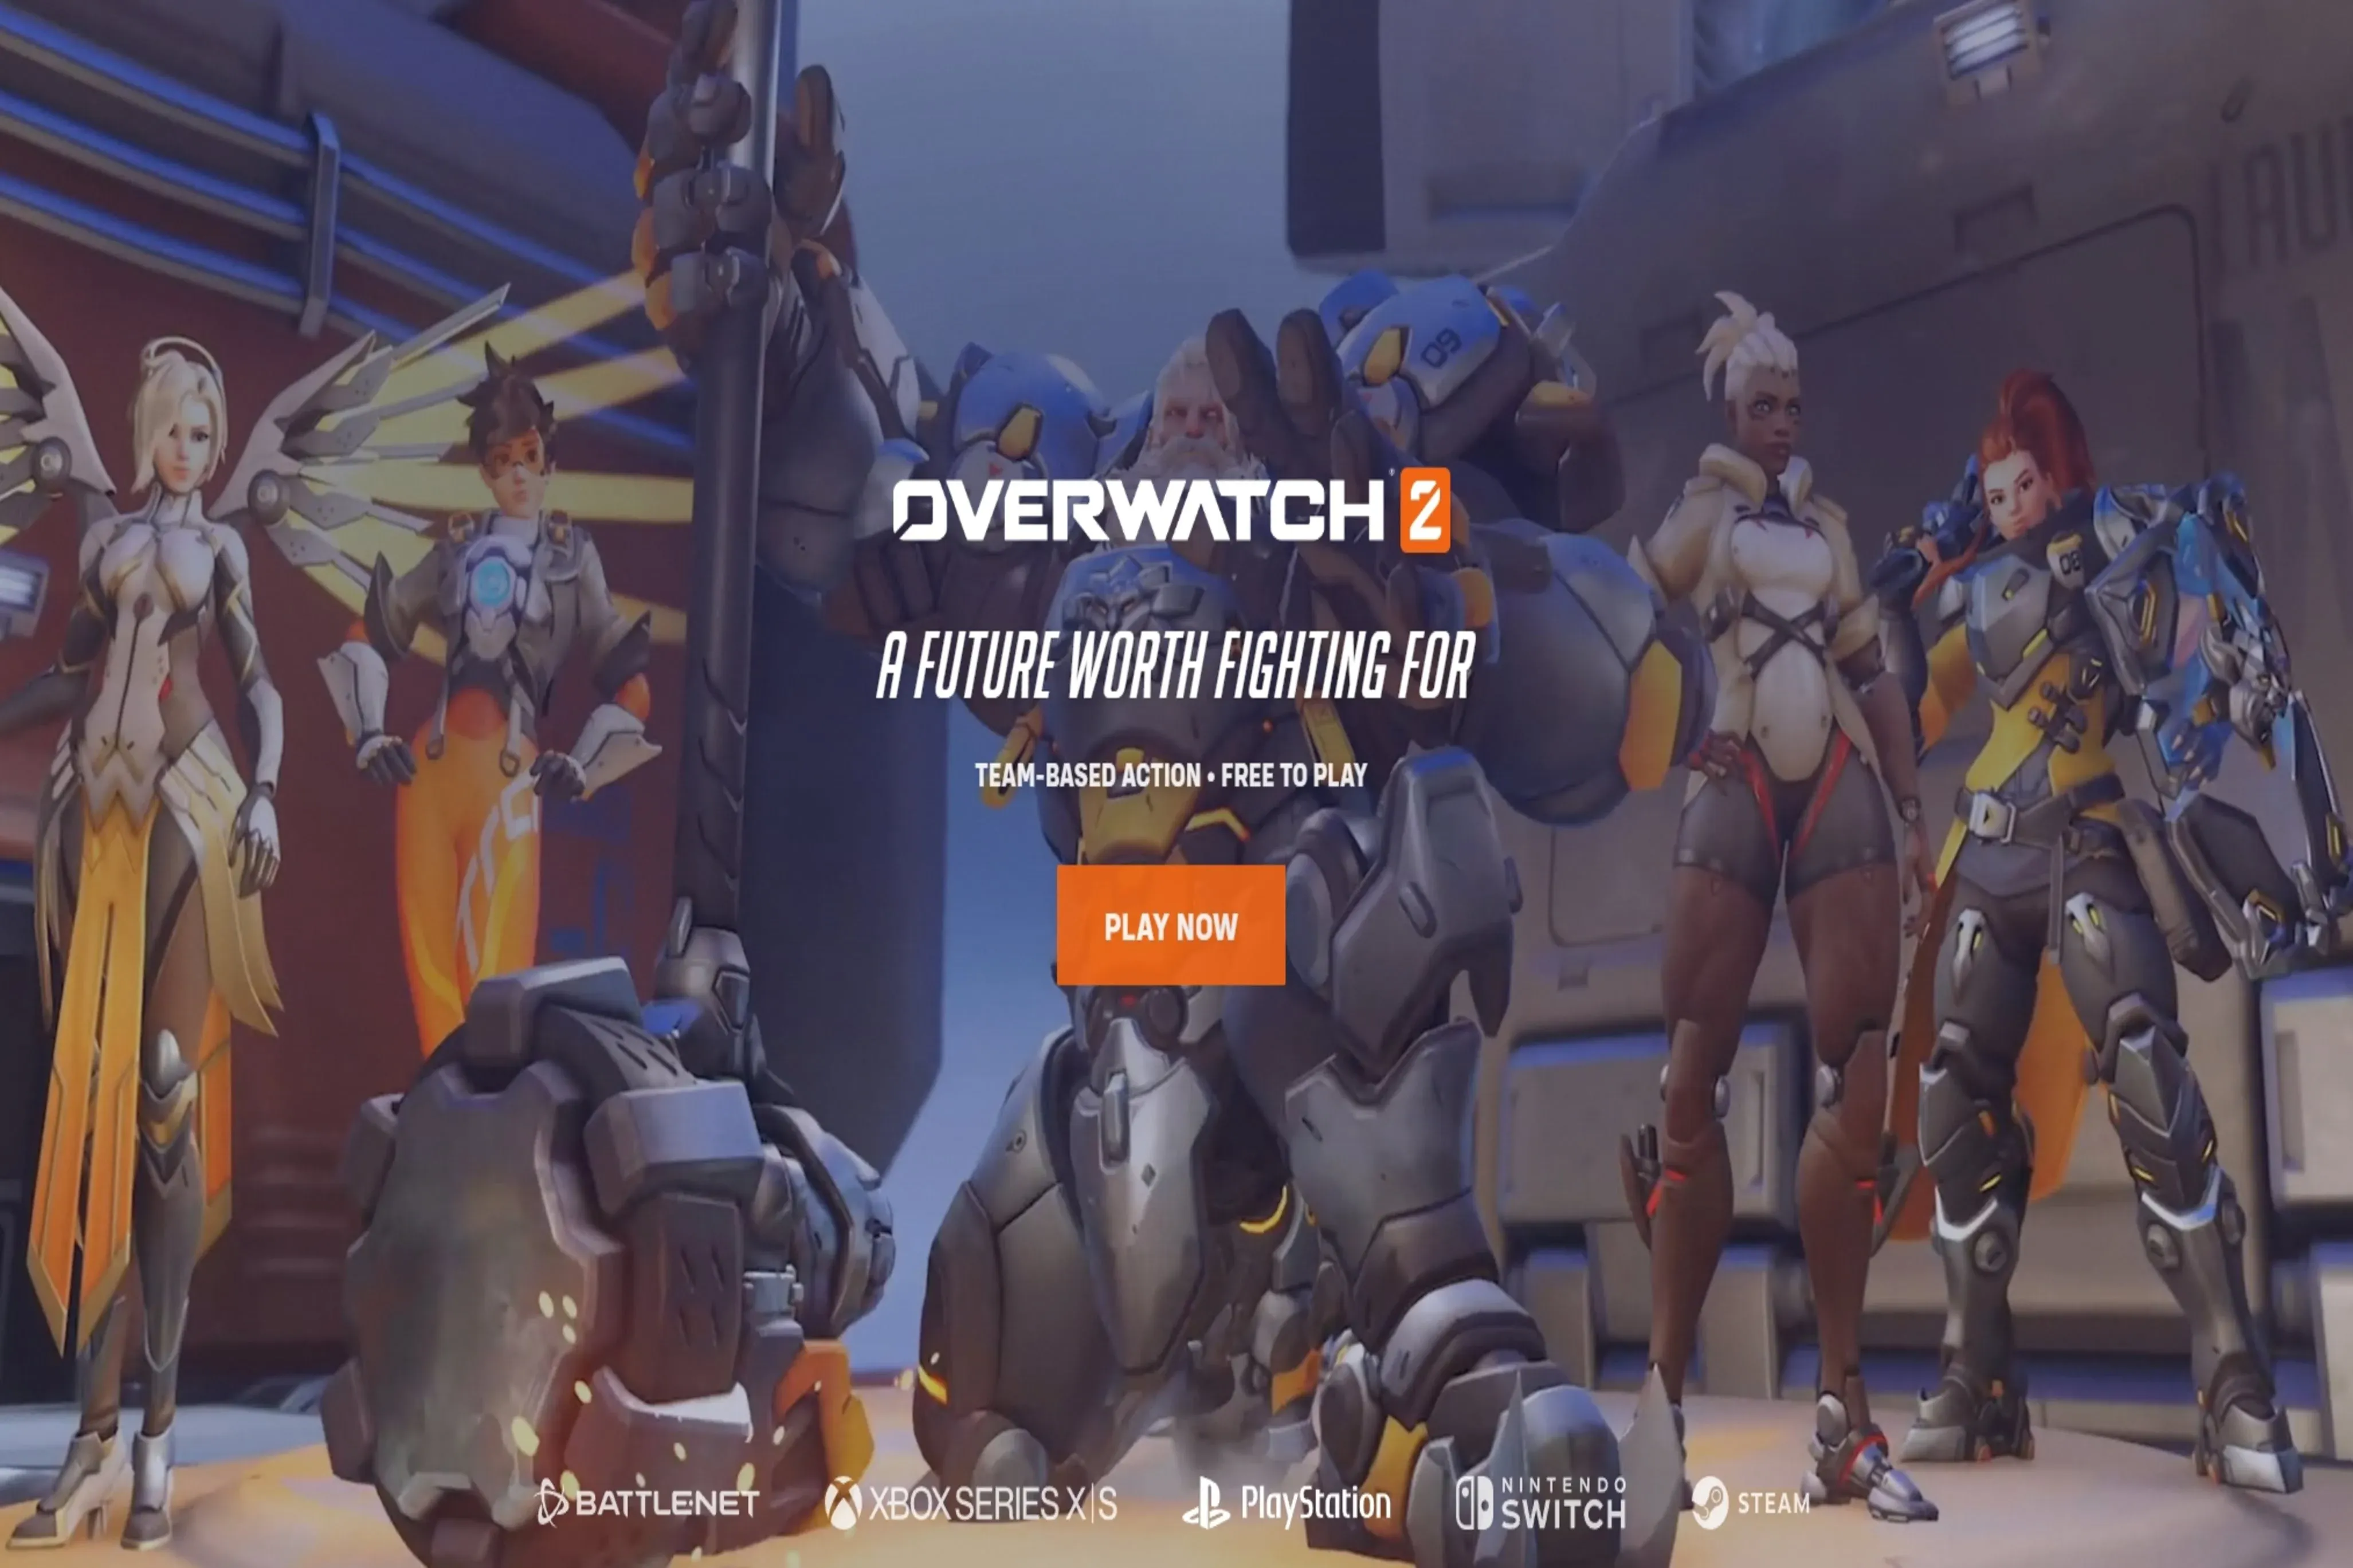 How to Set Overwatch Parental Control Settings | Step-by-Step Guide